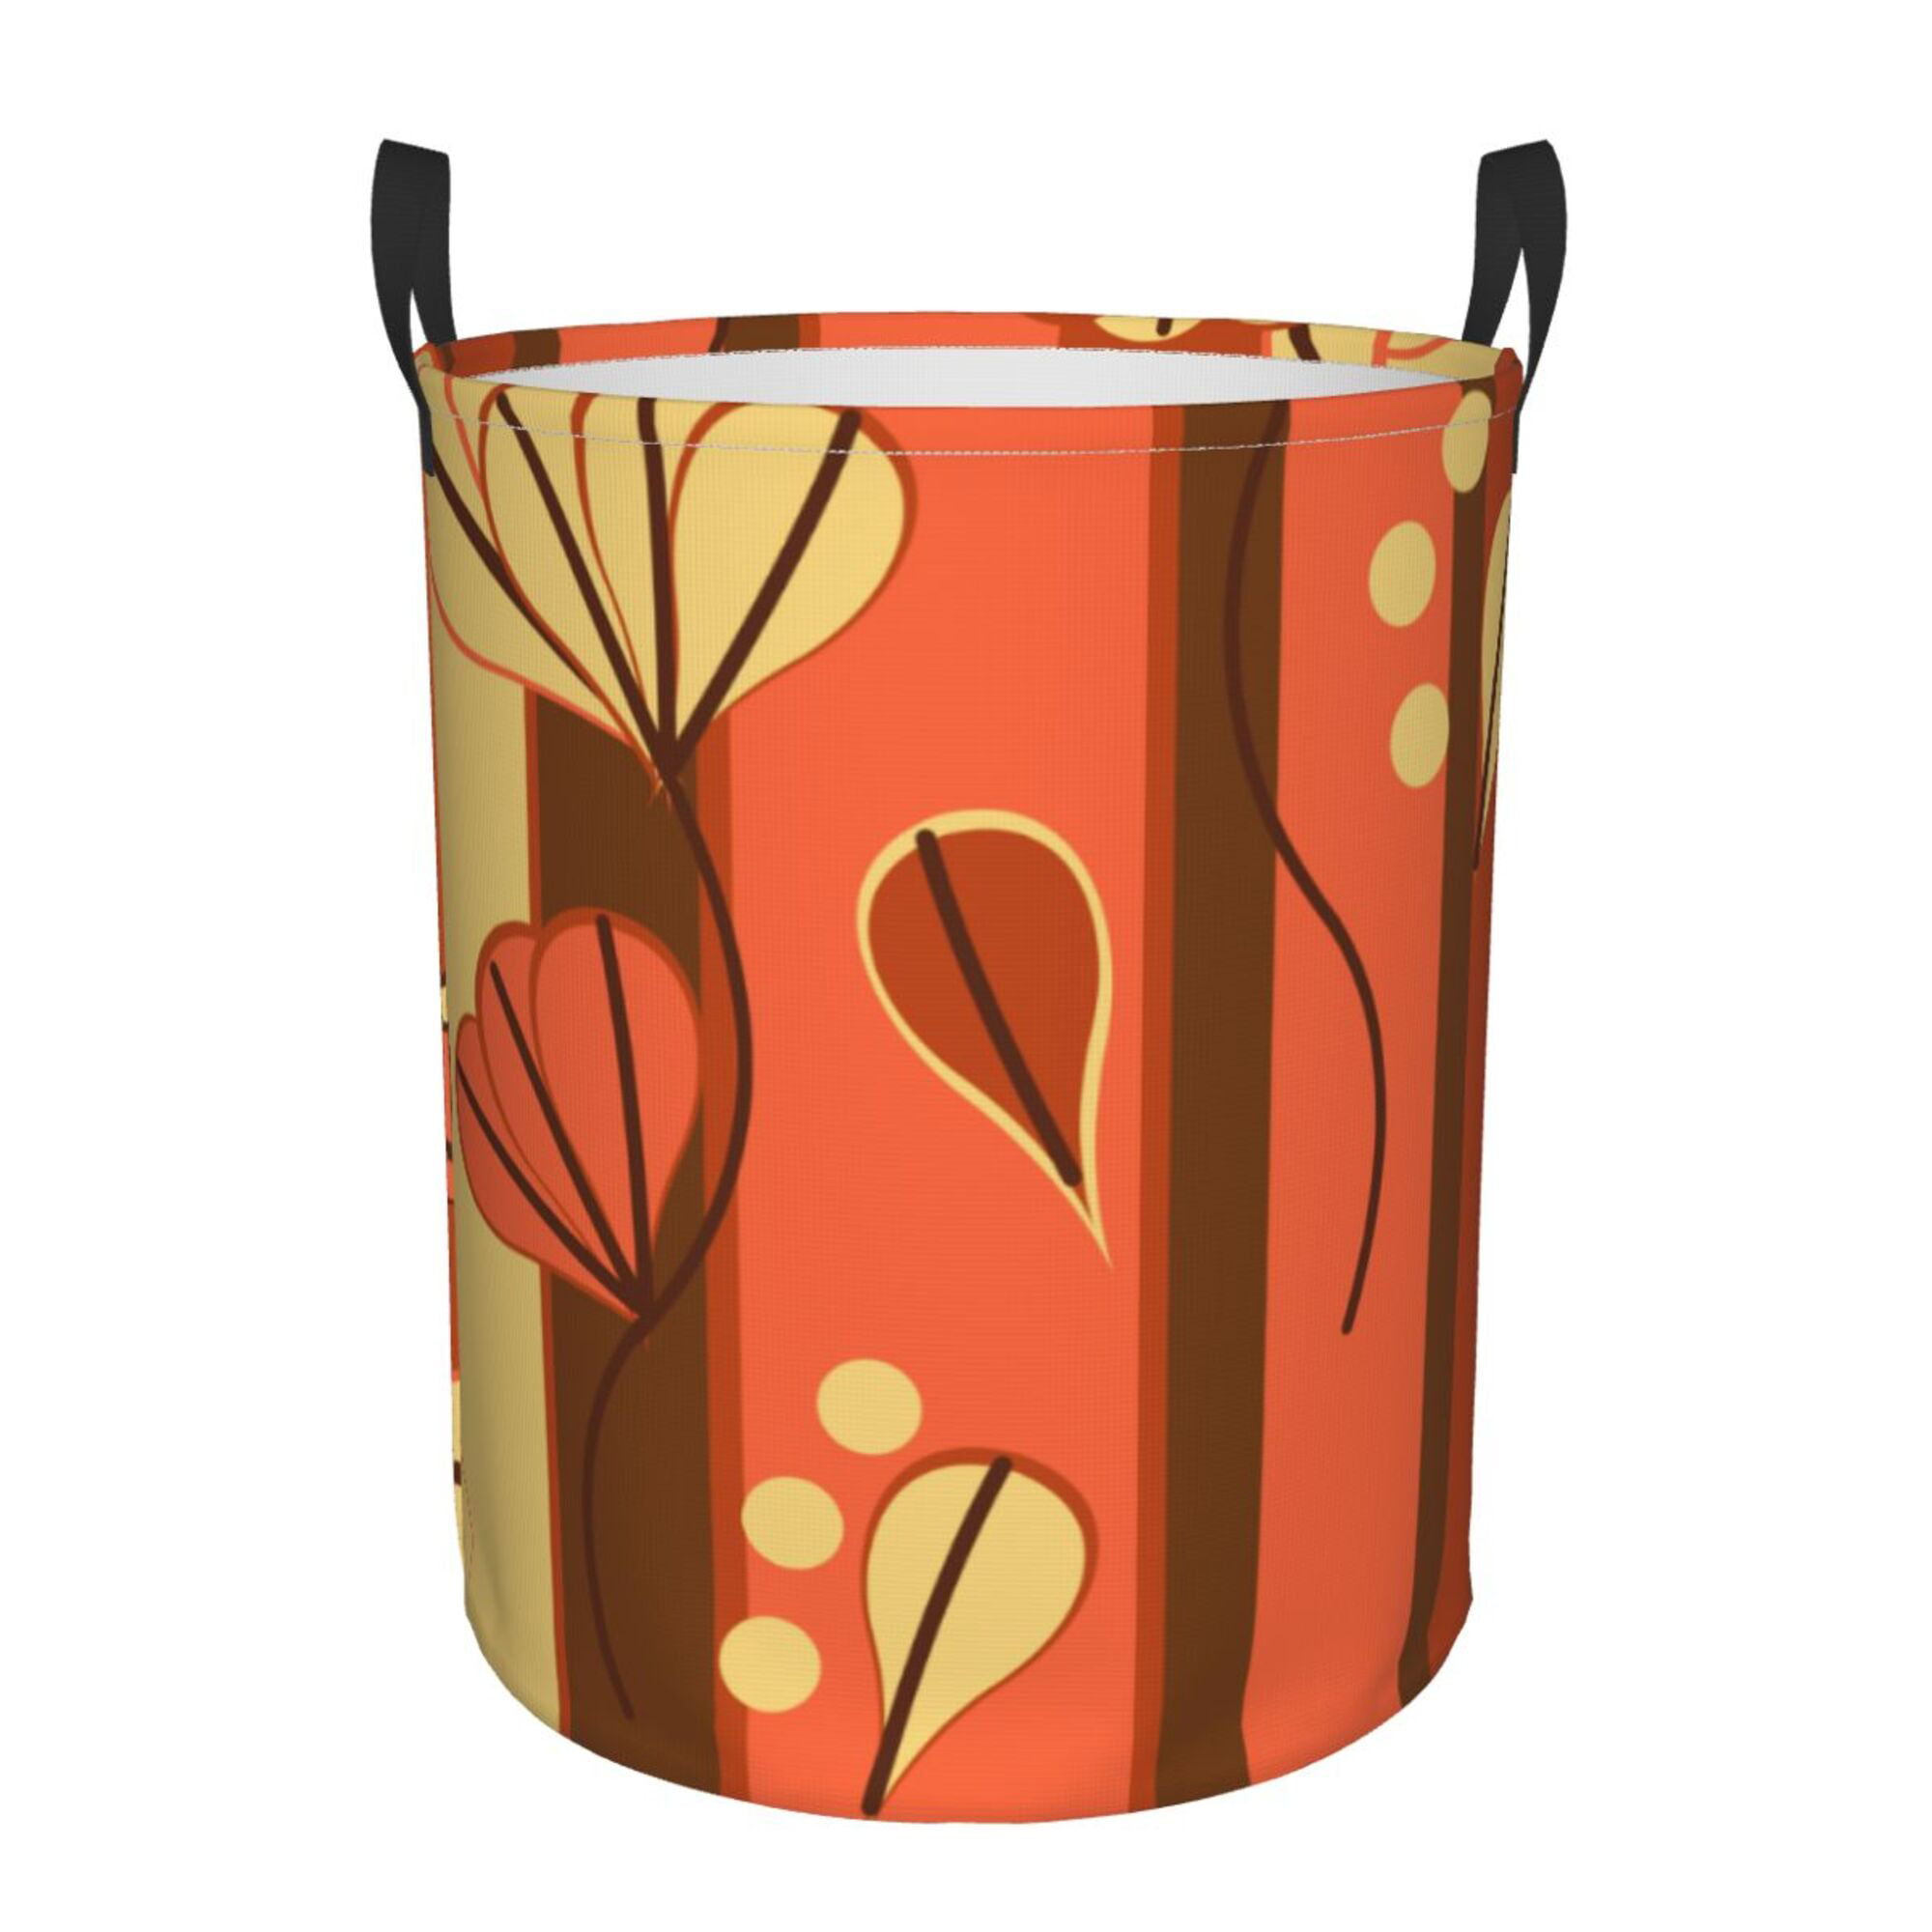 ZICANCN Vintage Brown Leaves Laundry Basket Organizer , Dirty Clothes ...